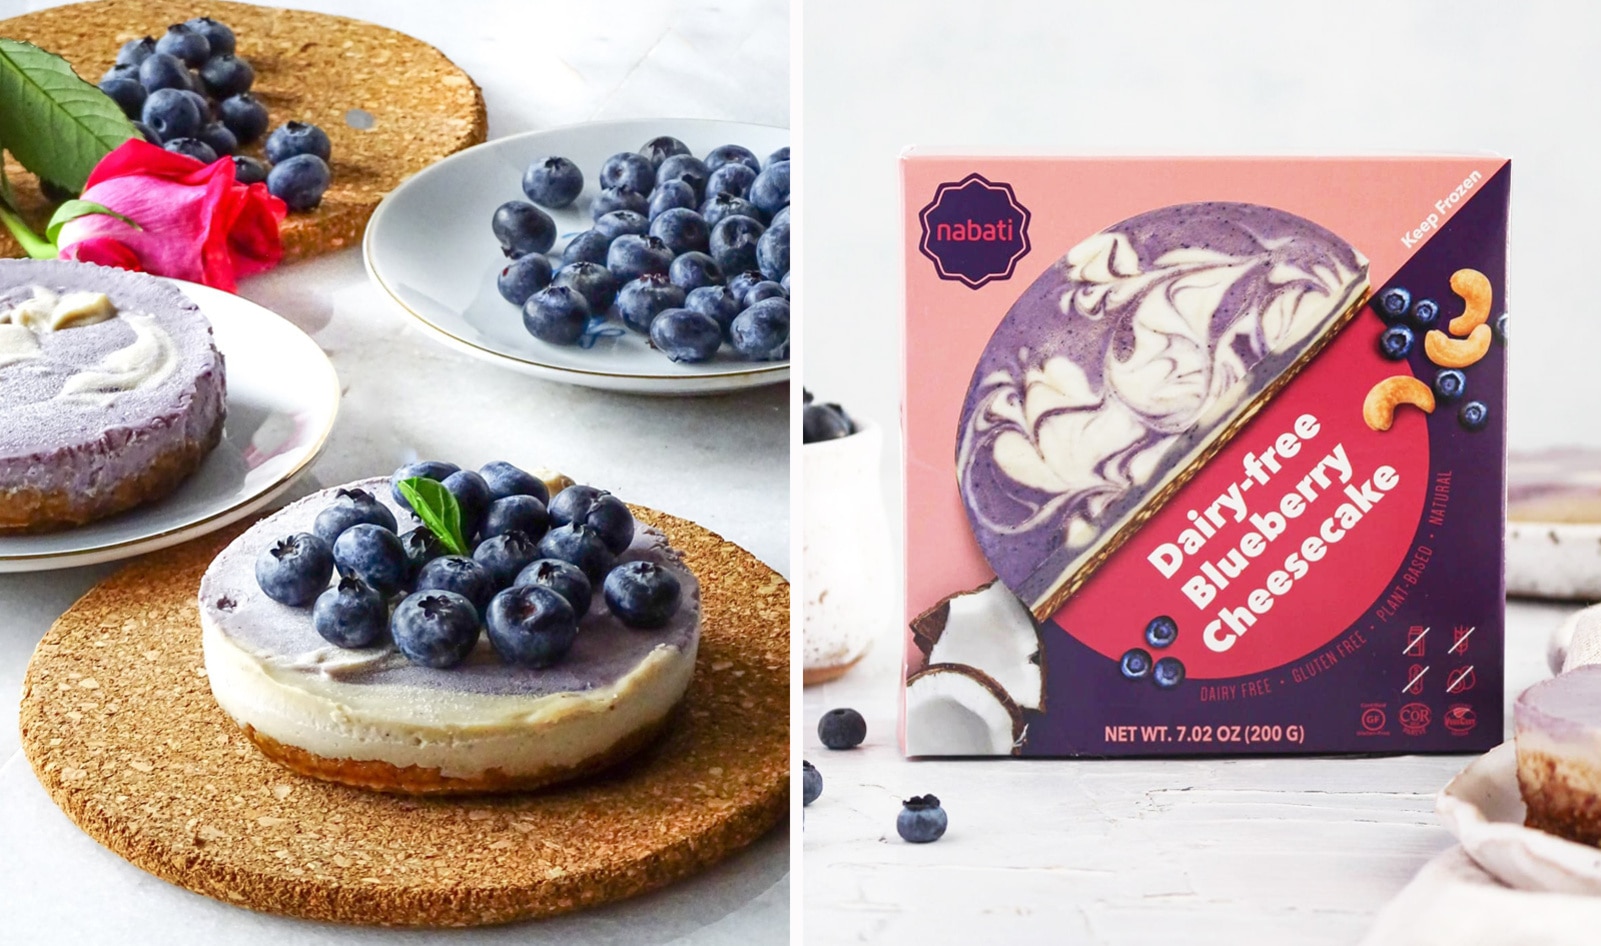 This Vegan Cheesecake Brand Is About to IPO